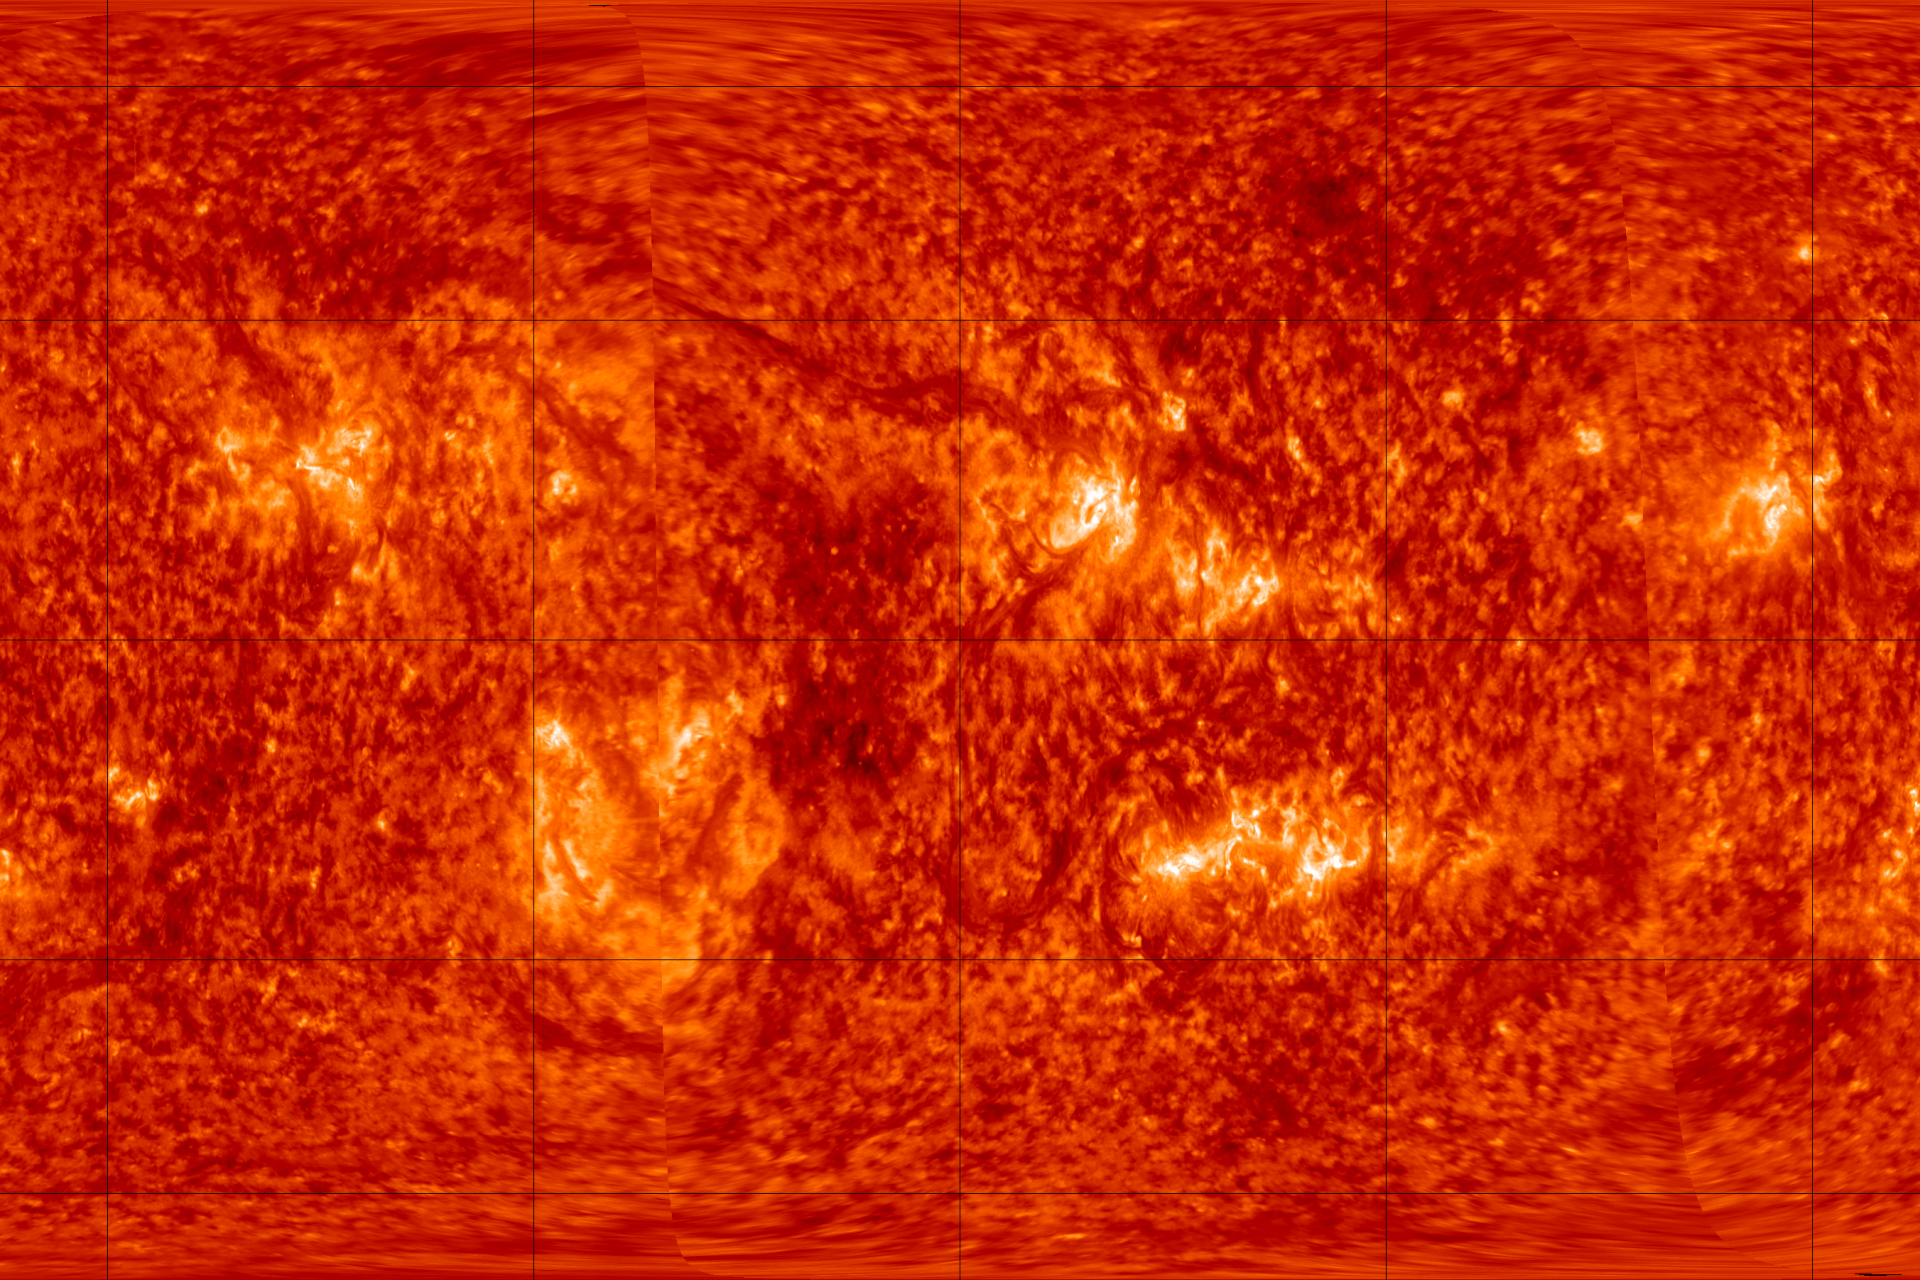 •	Full Sun map of the solar corona at roughly 144,000 F (80,000 C) acquired simultaneously by the two STEREO EUV imagers. Before STEREO, this capability was available for Earth observations only.